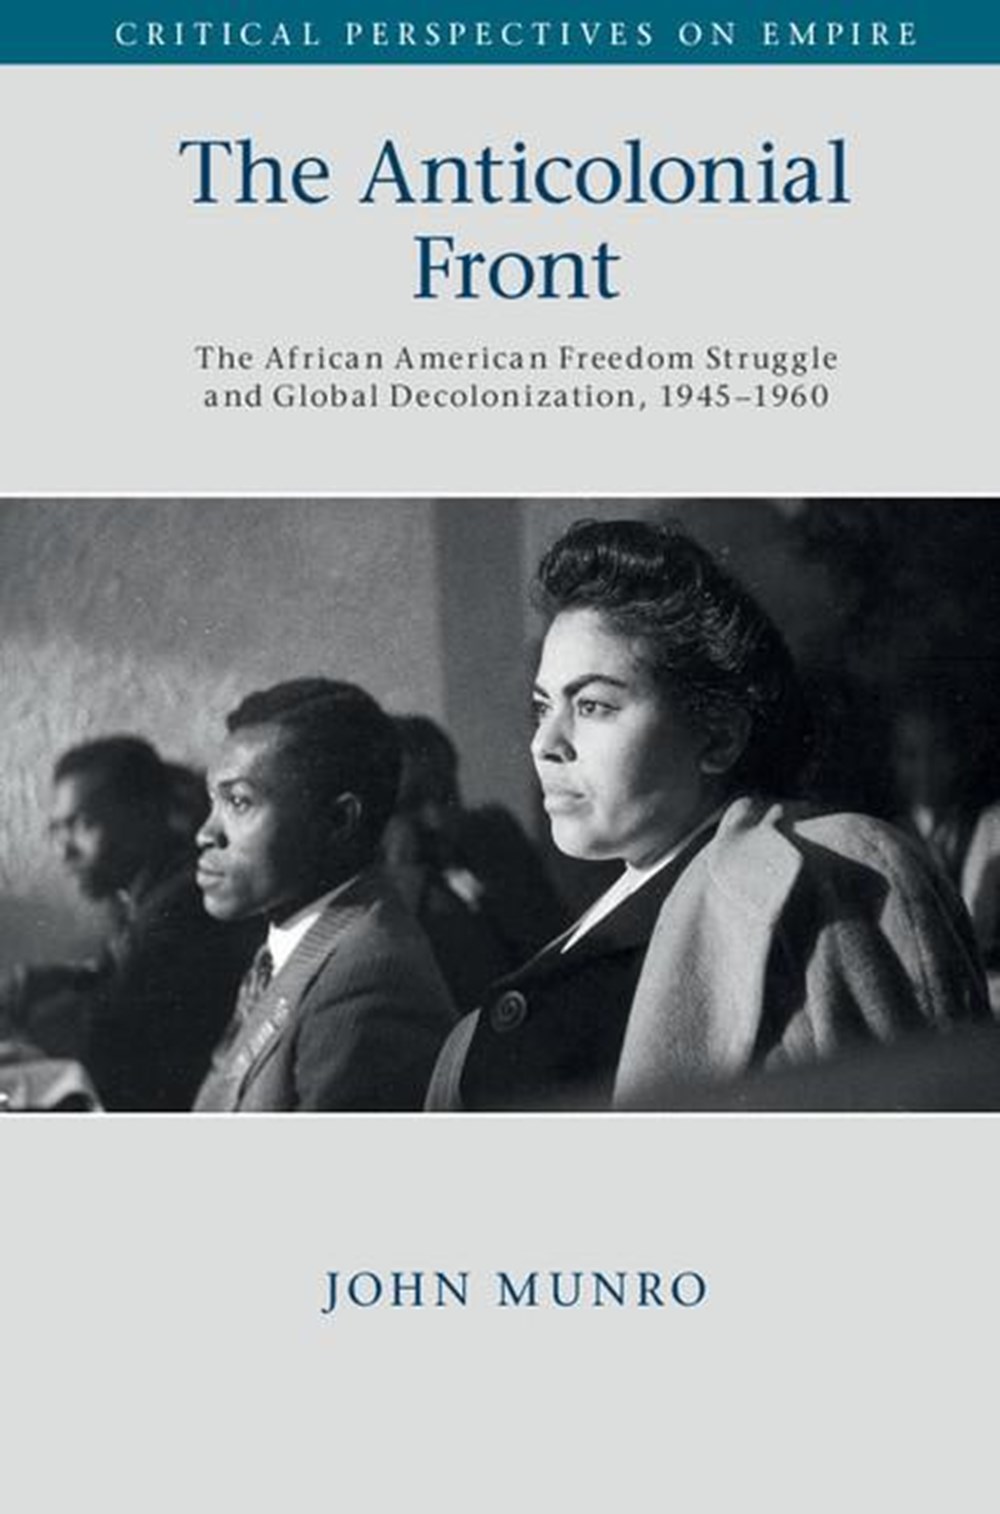 Anticolonial Front: The African American Freedom Struggle and Global Decolonisation, 1945-1960